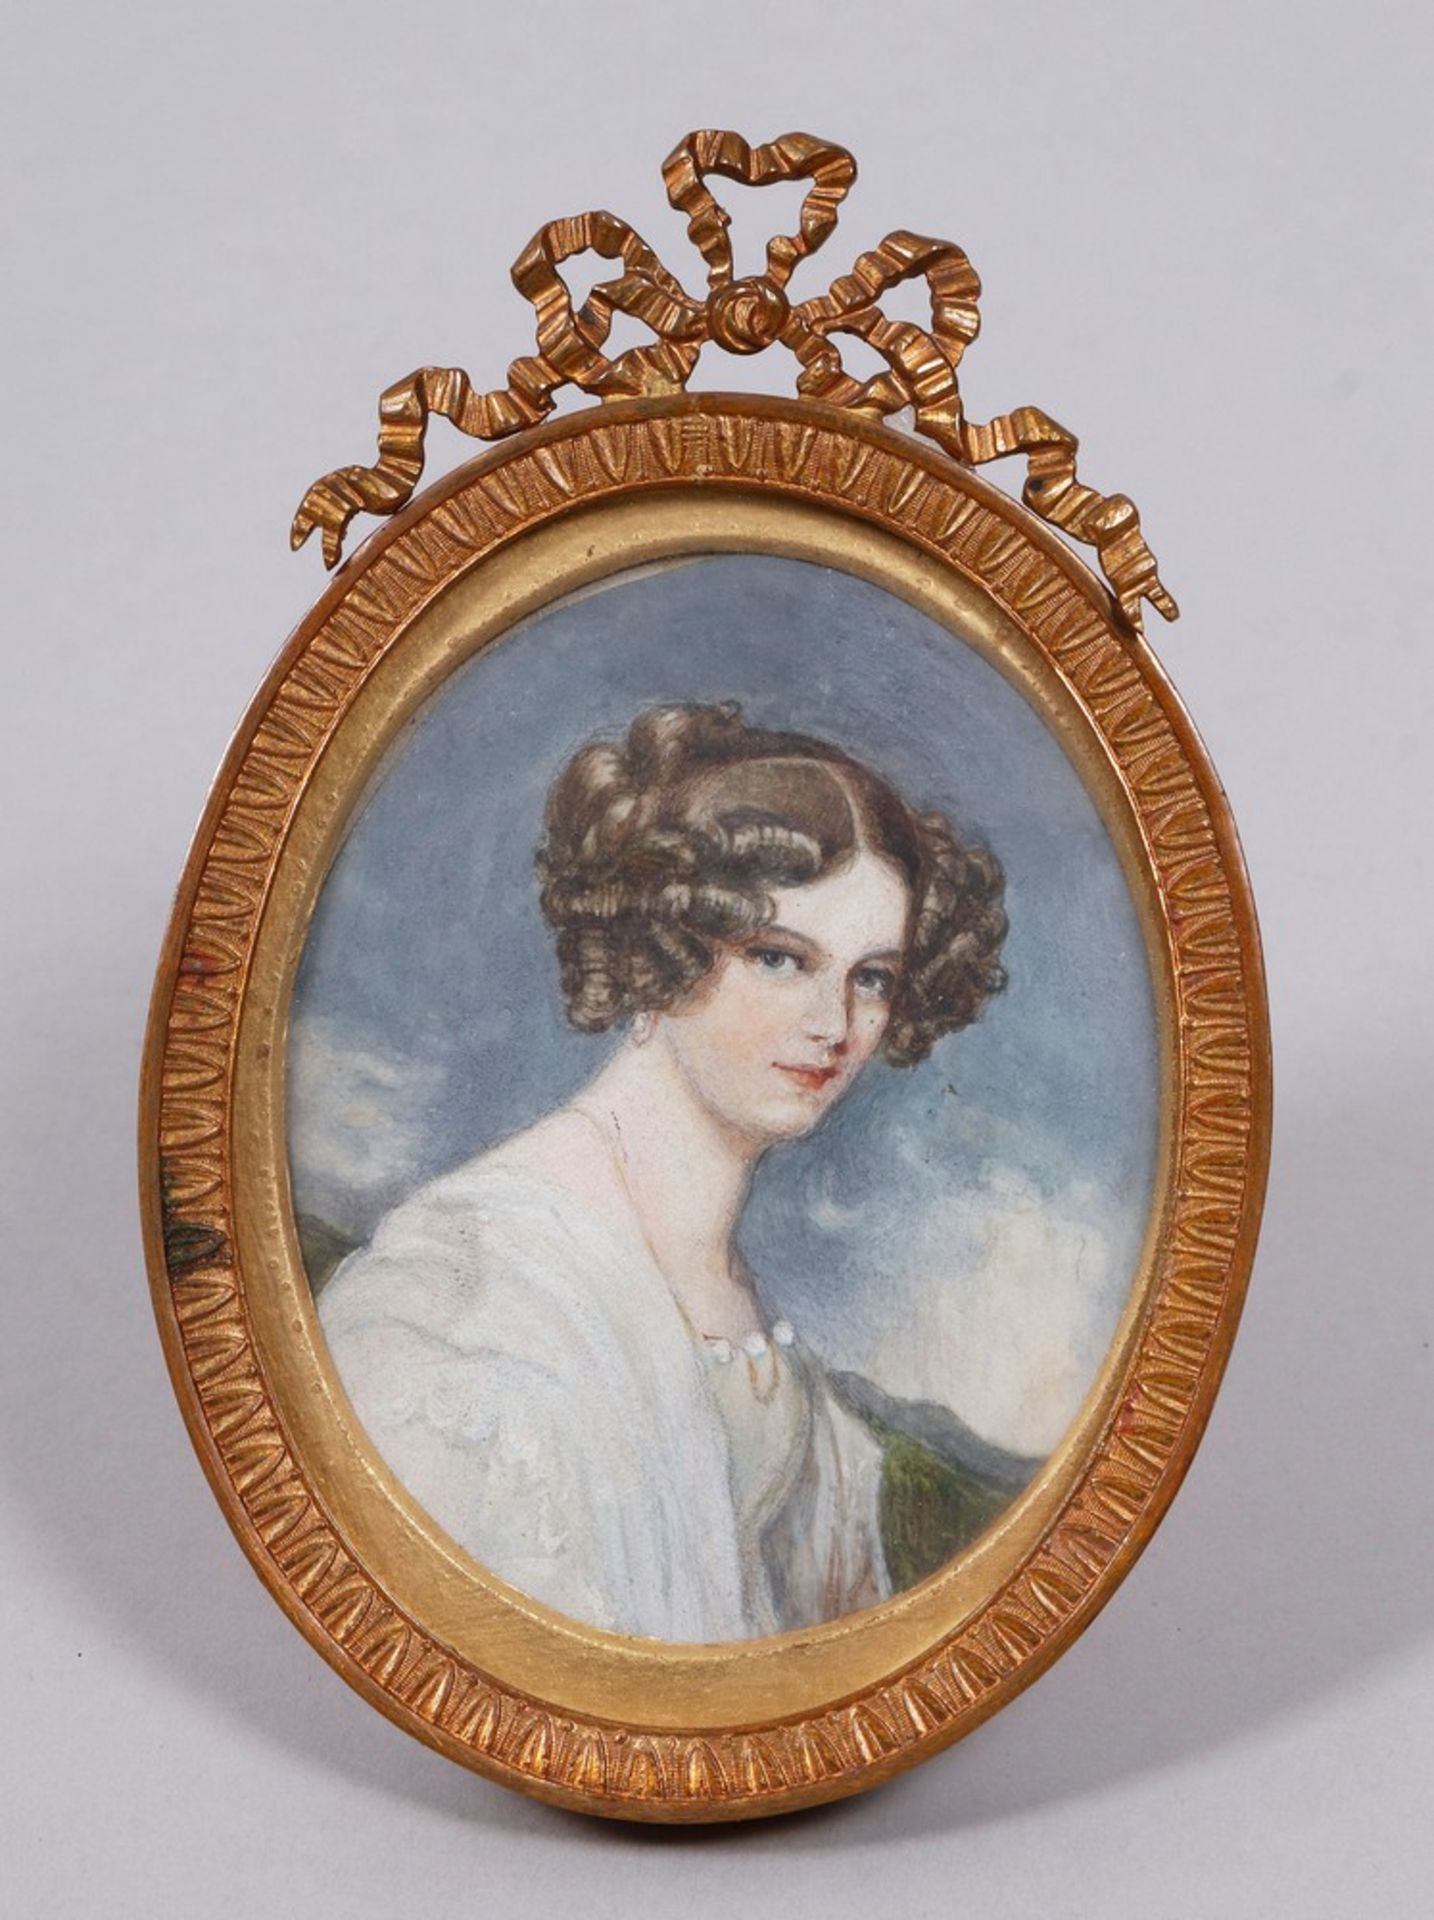 Unknown miniature painter (probably German, early 20th C.)